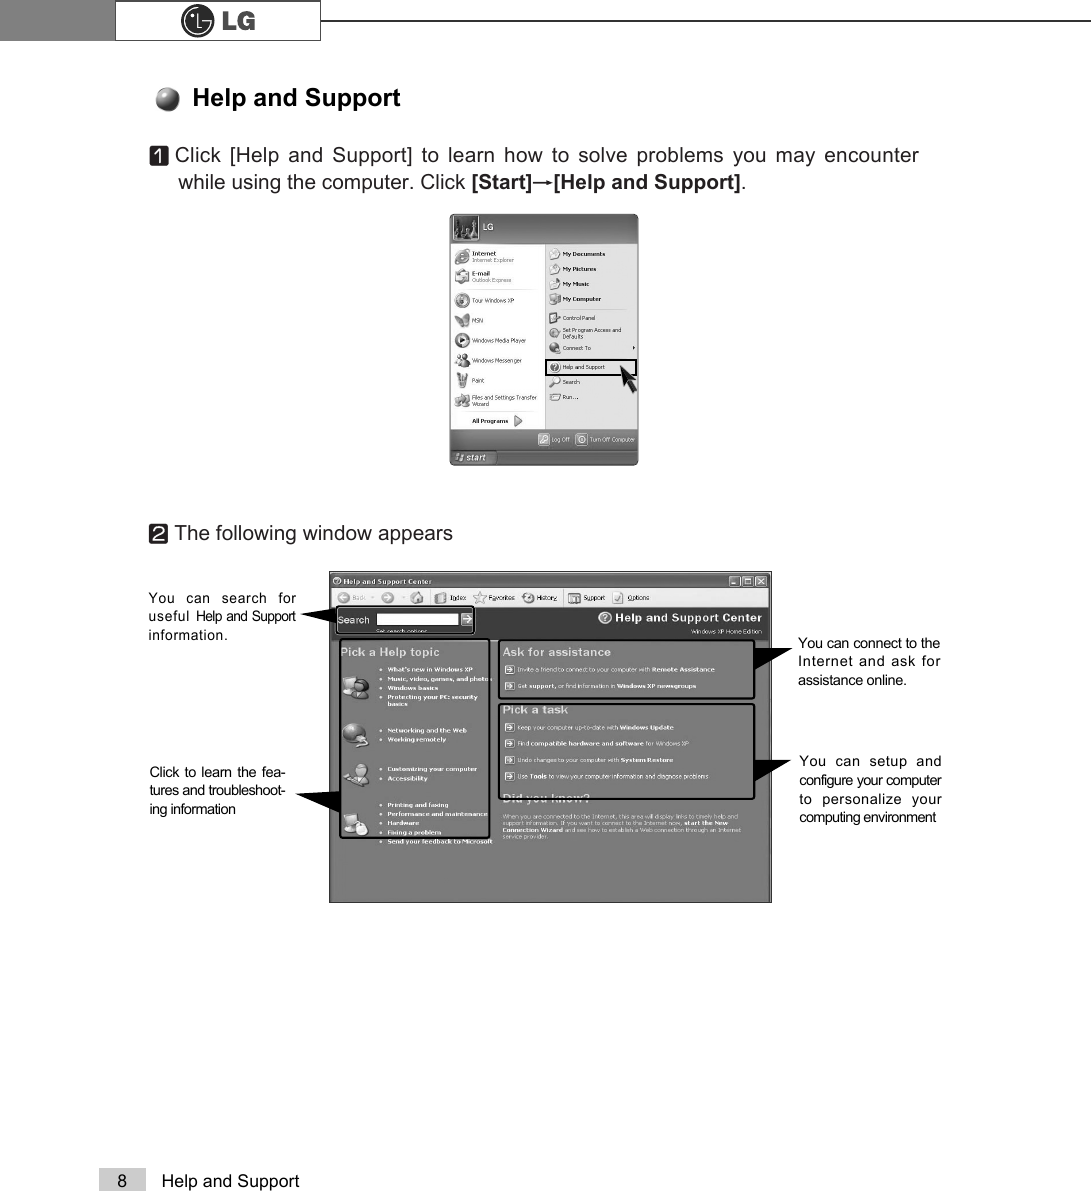 8 Help and SupportⓞClick [Help and Support] to learn how to solve problems you may encounterwhile using the computer. Click [Start]⍛[Help and Support].ⓟThe following window appearsHelp and SupportYou can search foruseful Help and Supportinformation.Click to learn the fea-tures and troubleshoot-ing informationYou can connect to theInternet and ask forassistance online.You can setup andconfigure your computerto personalize yourcomputing environment